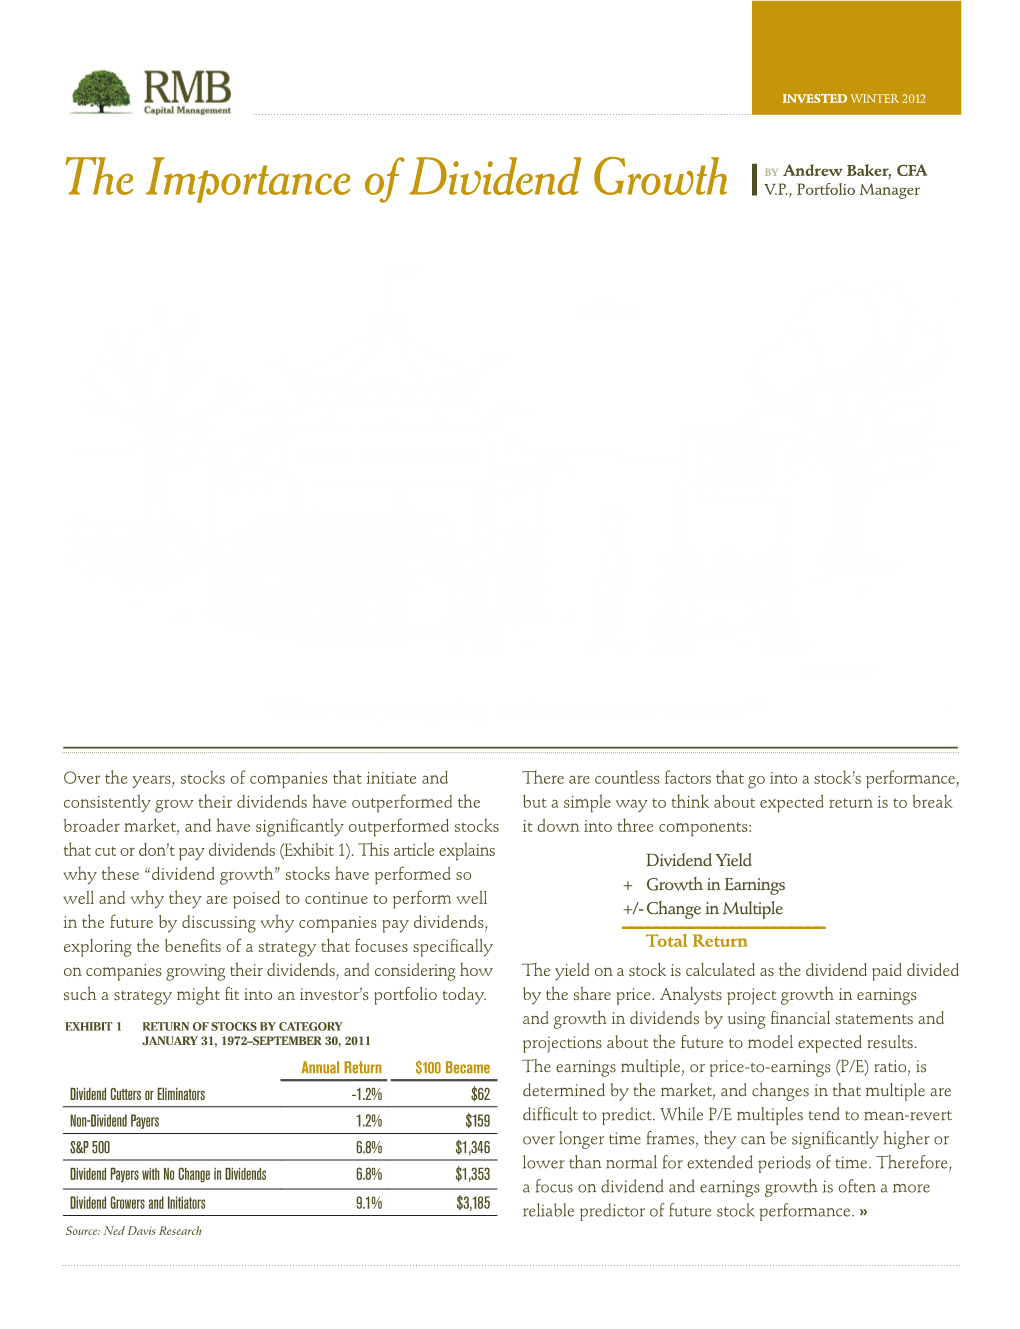 The Importance of Dividend Growth V.P., Portfolio Manager